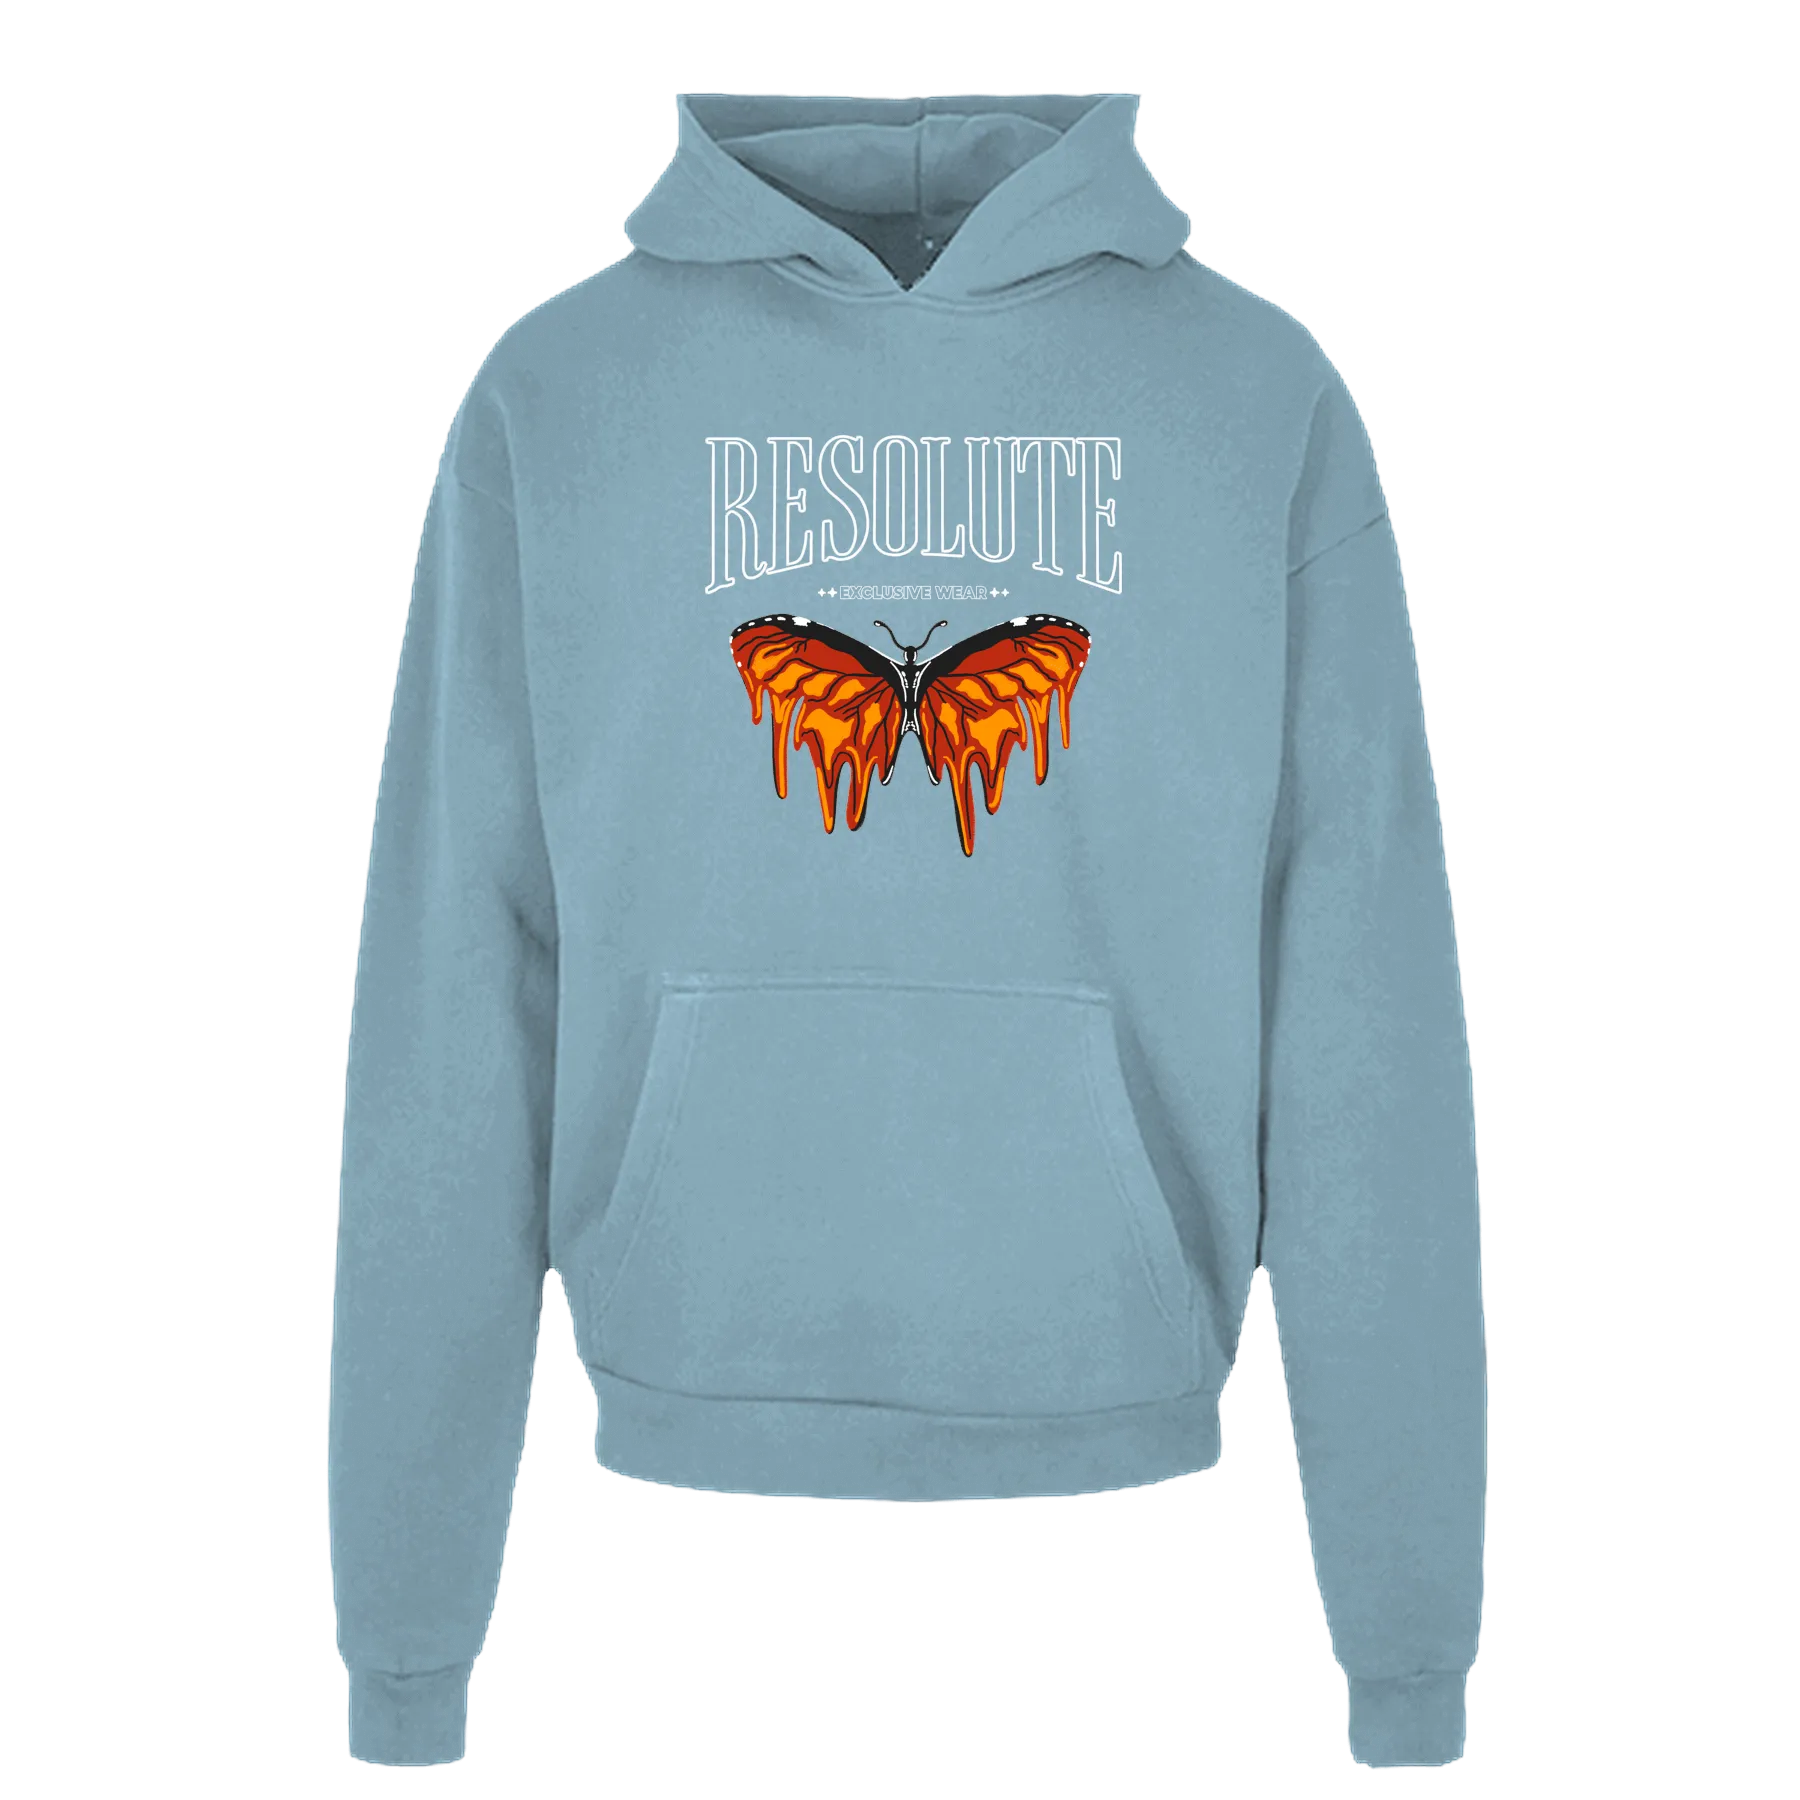 Super Heavy Hoodie - Dripping Butterfly [Stick], Hoodie, Clothing, Resolute Exclusive Wear